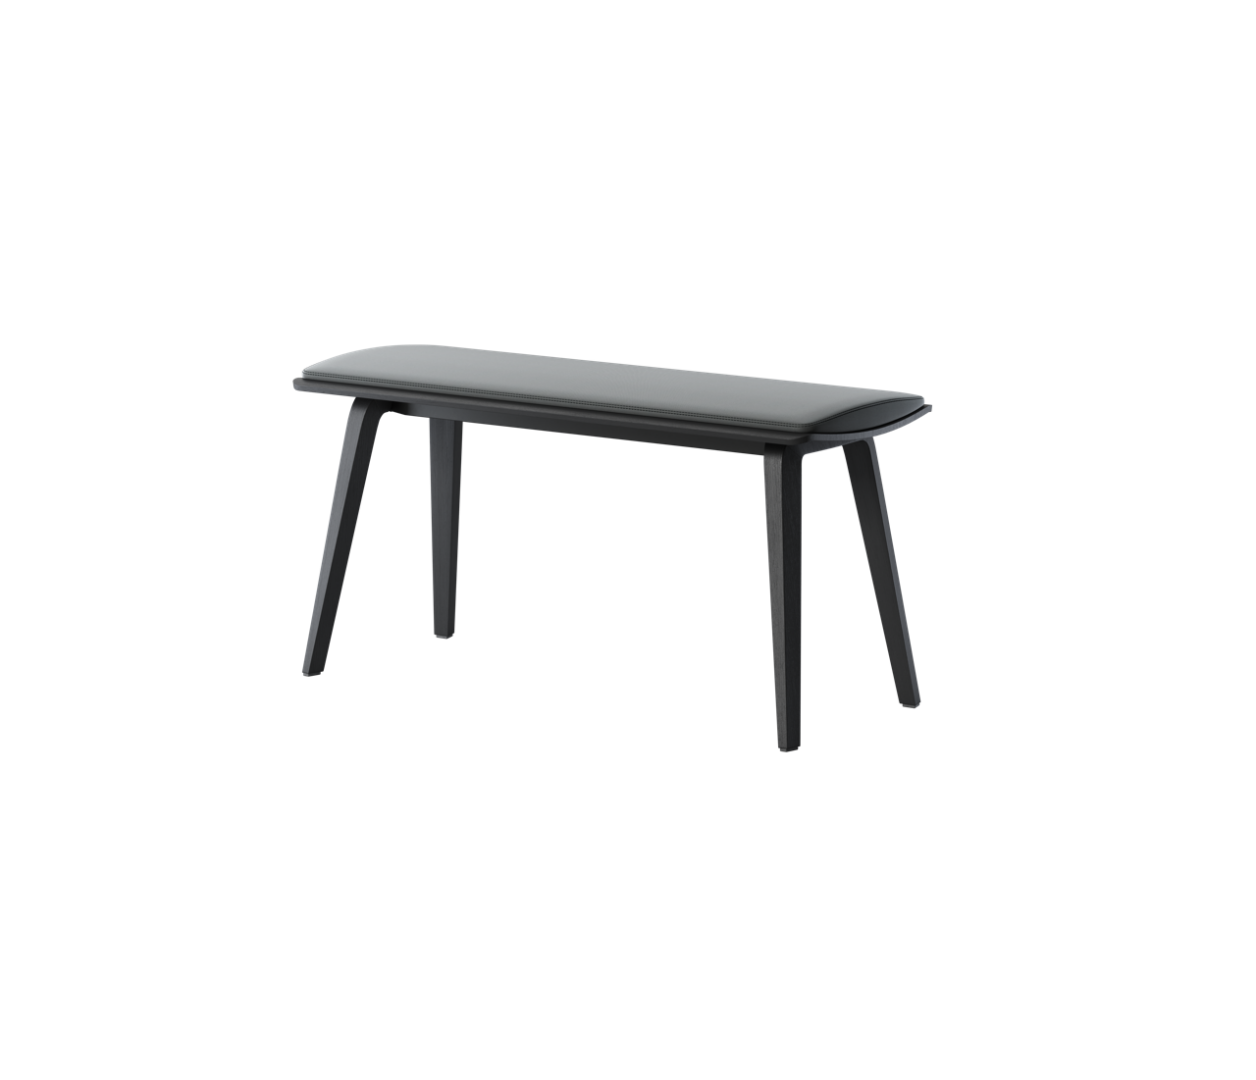 OCEE&FOUR – Stools & Benches – Share Bench – Packshot Image(26) Large